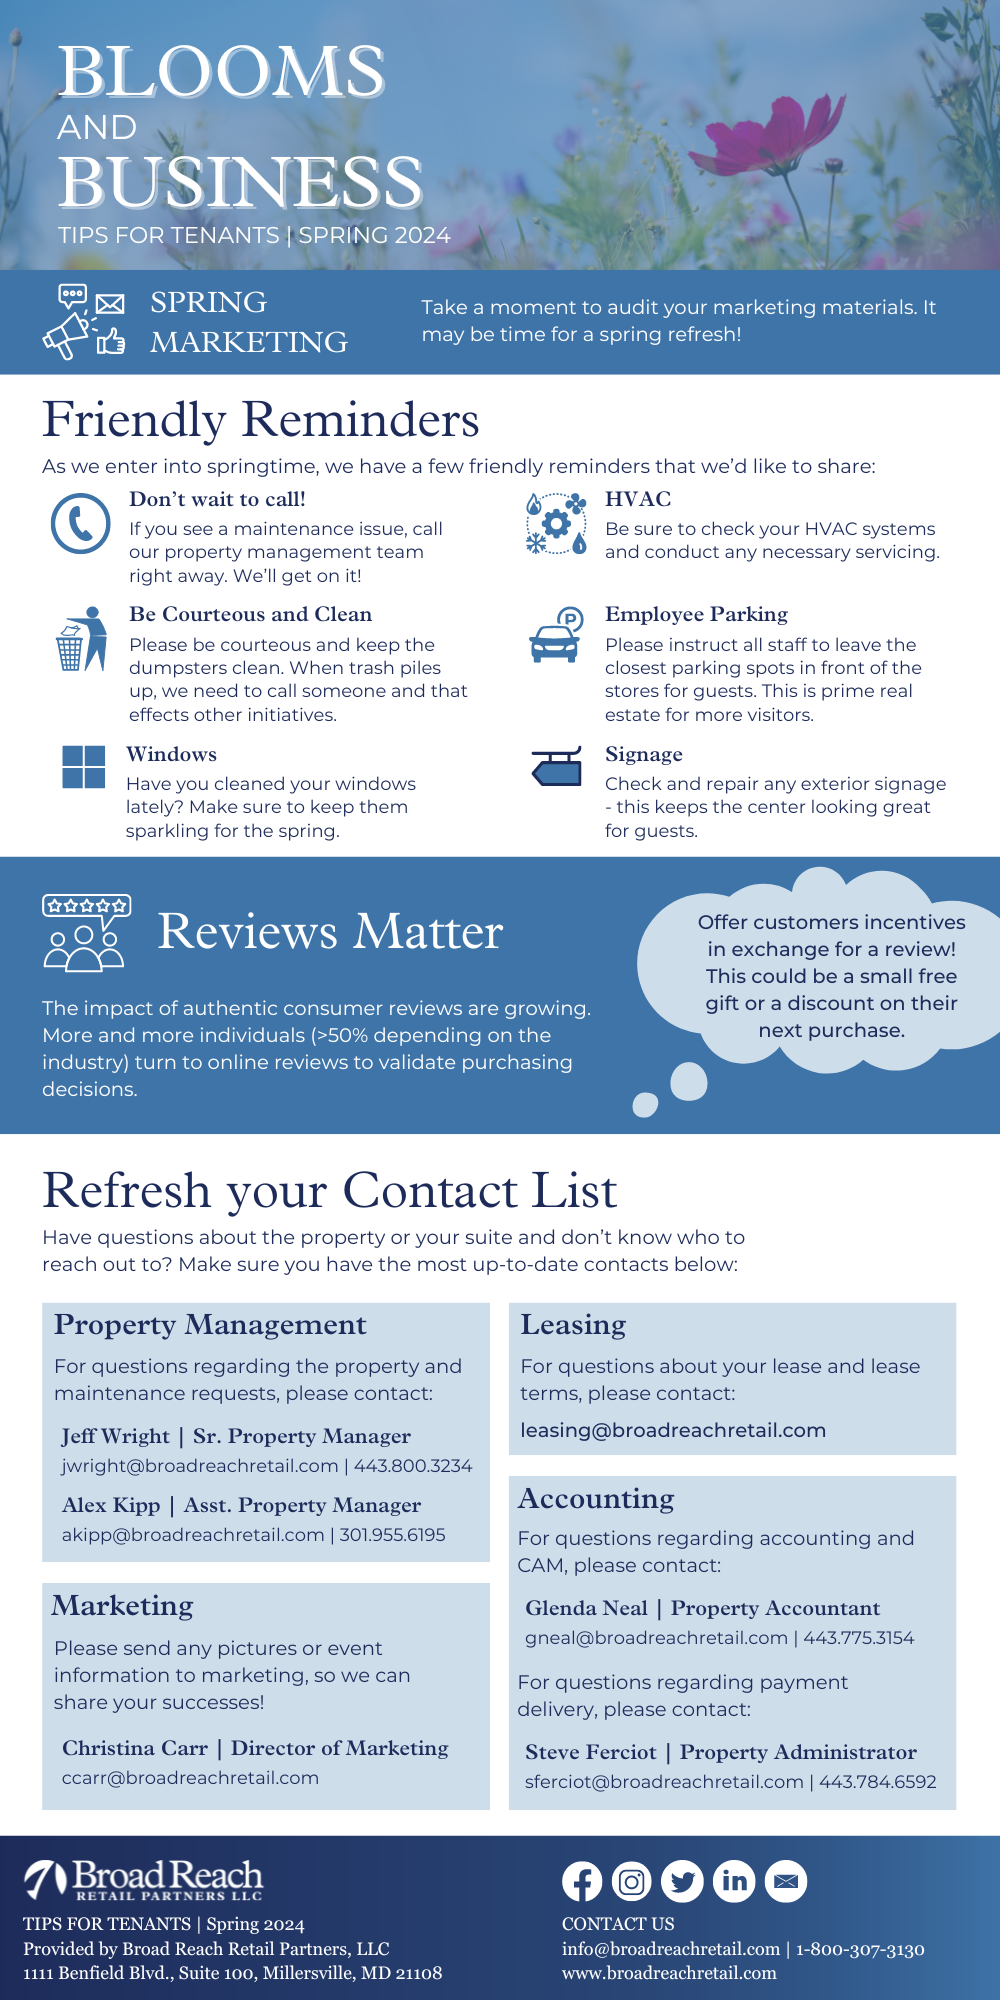 The Tips and Tenants infographic for Spring 2024